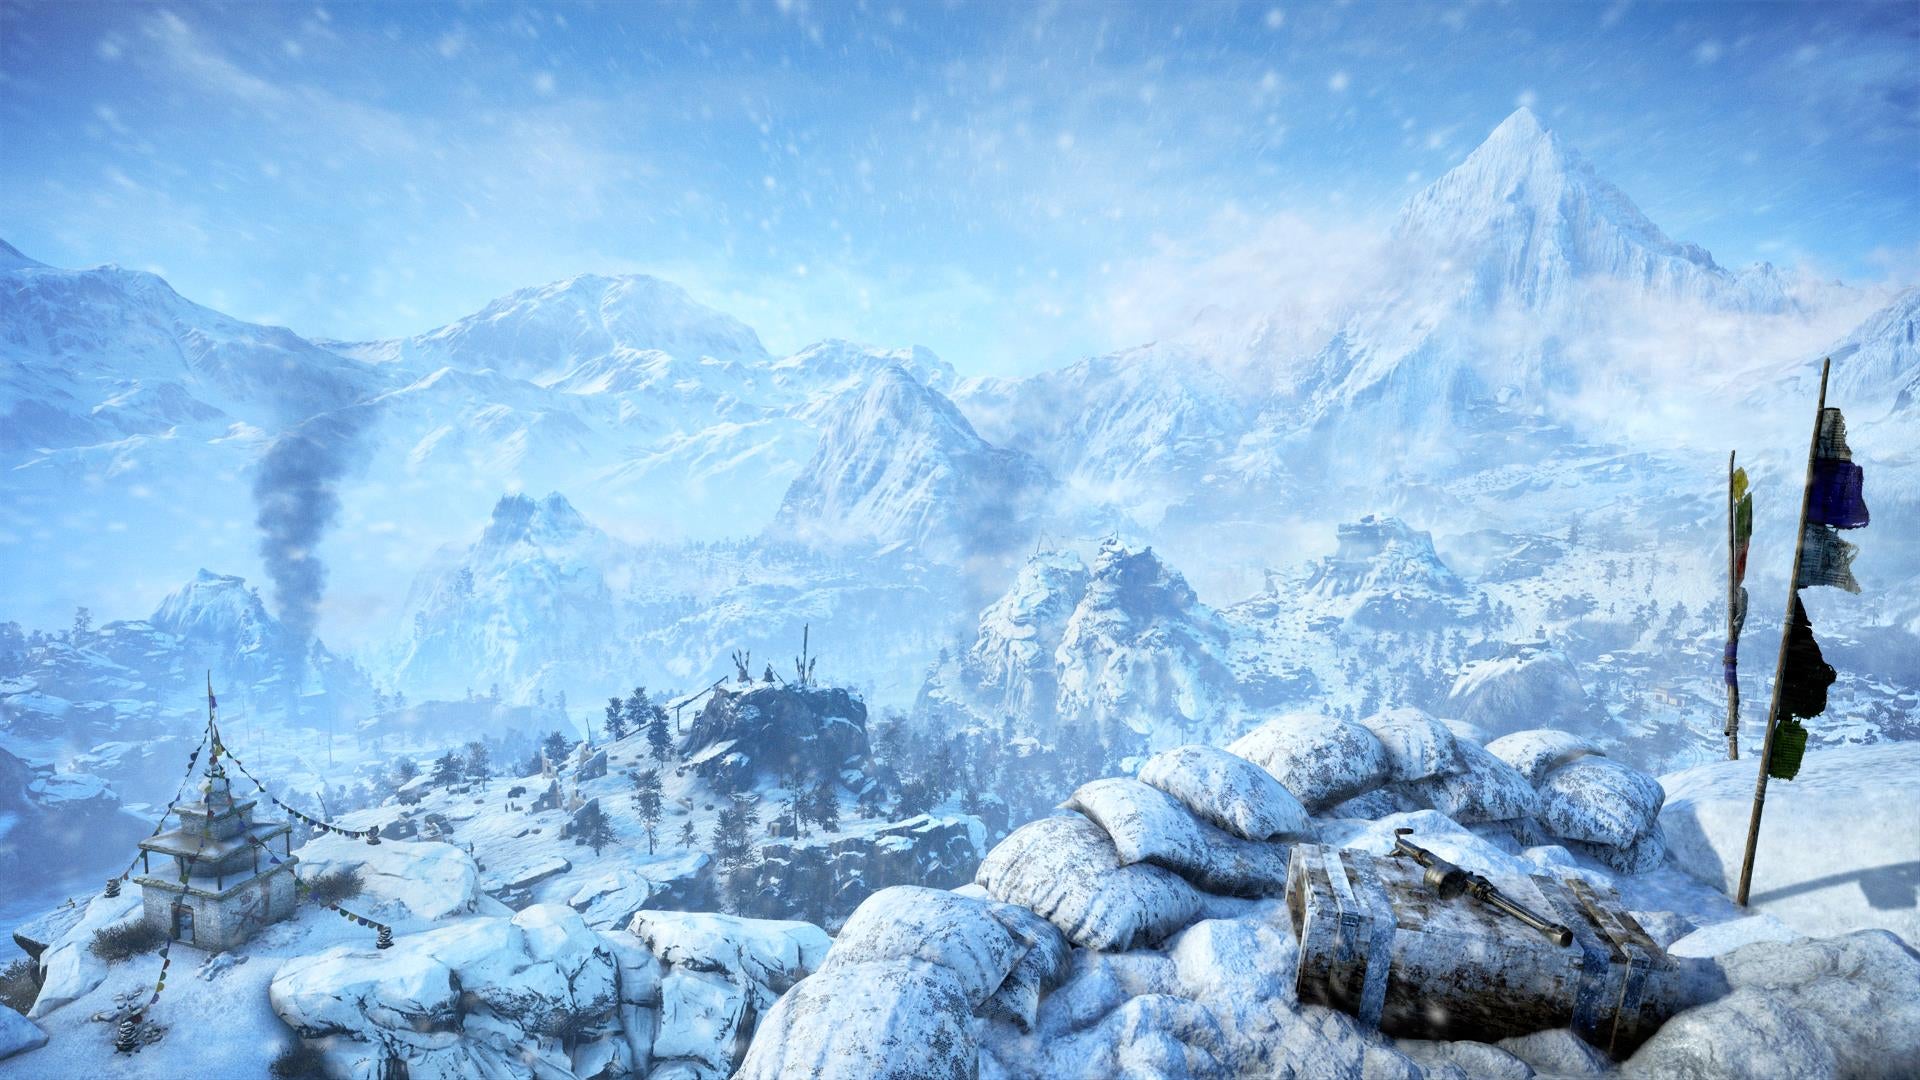 Image for Today's Ubisoft announcement likely for Far Cry Primal - rumour